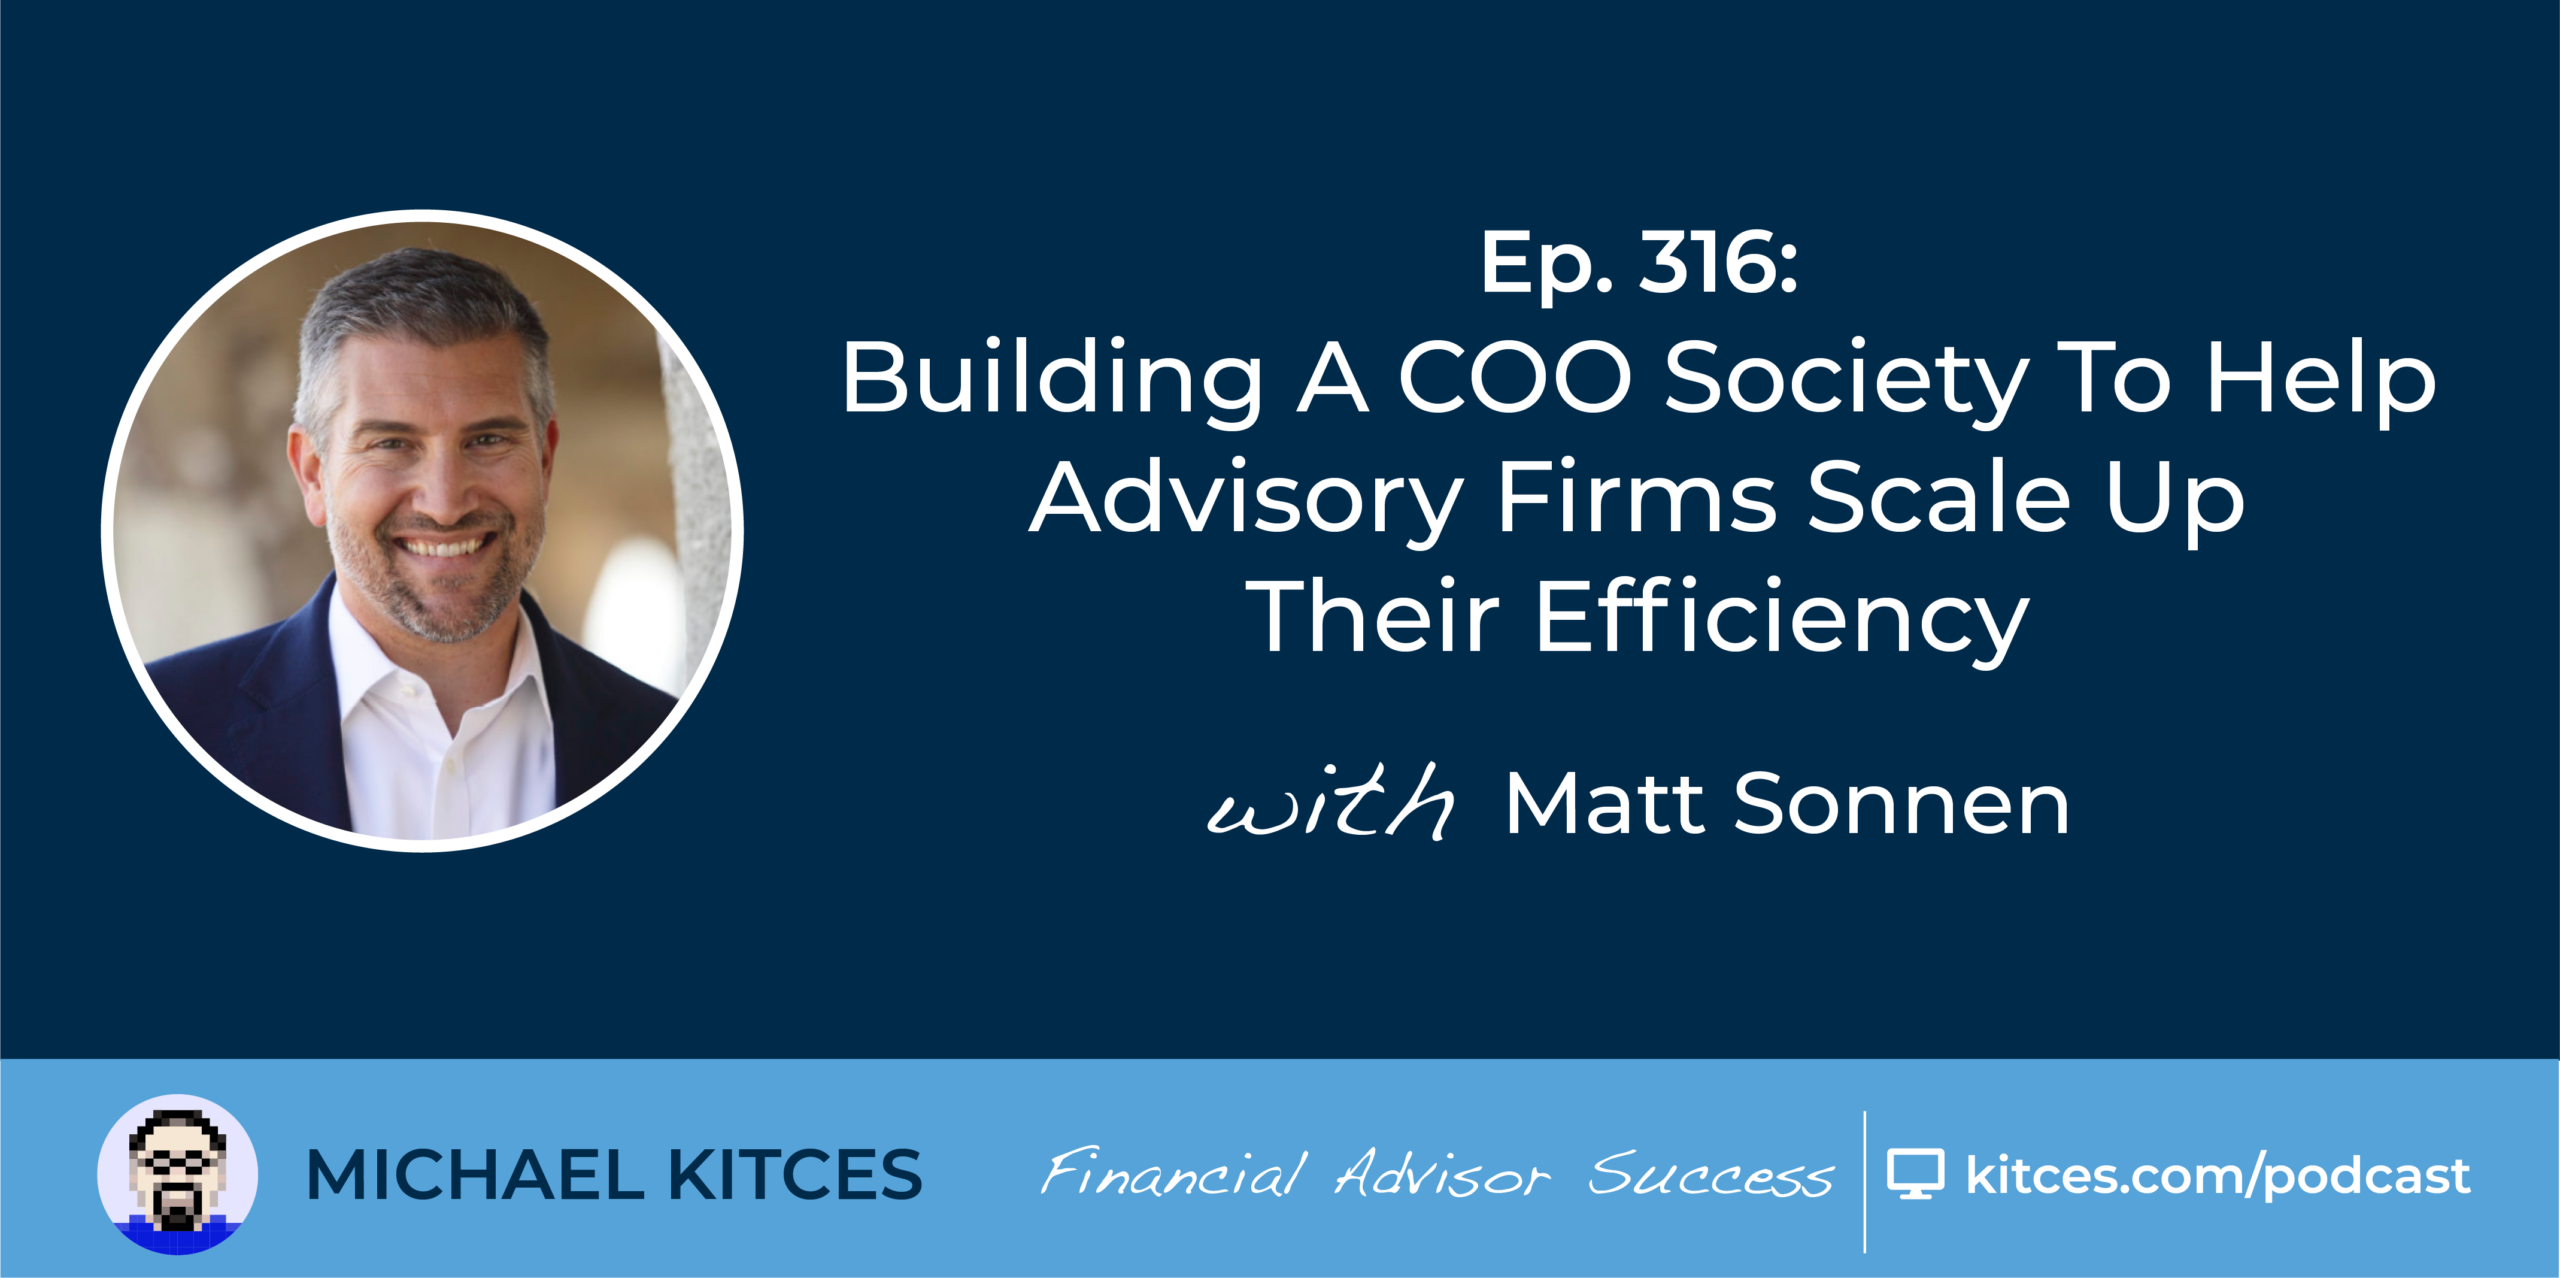 #FA Success Ep 316: Building A COO Society To Help Advisory Firms Scale Up Their Efficiency, With Matt Sonnen